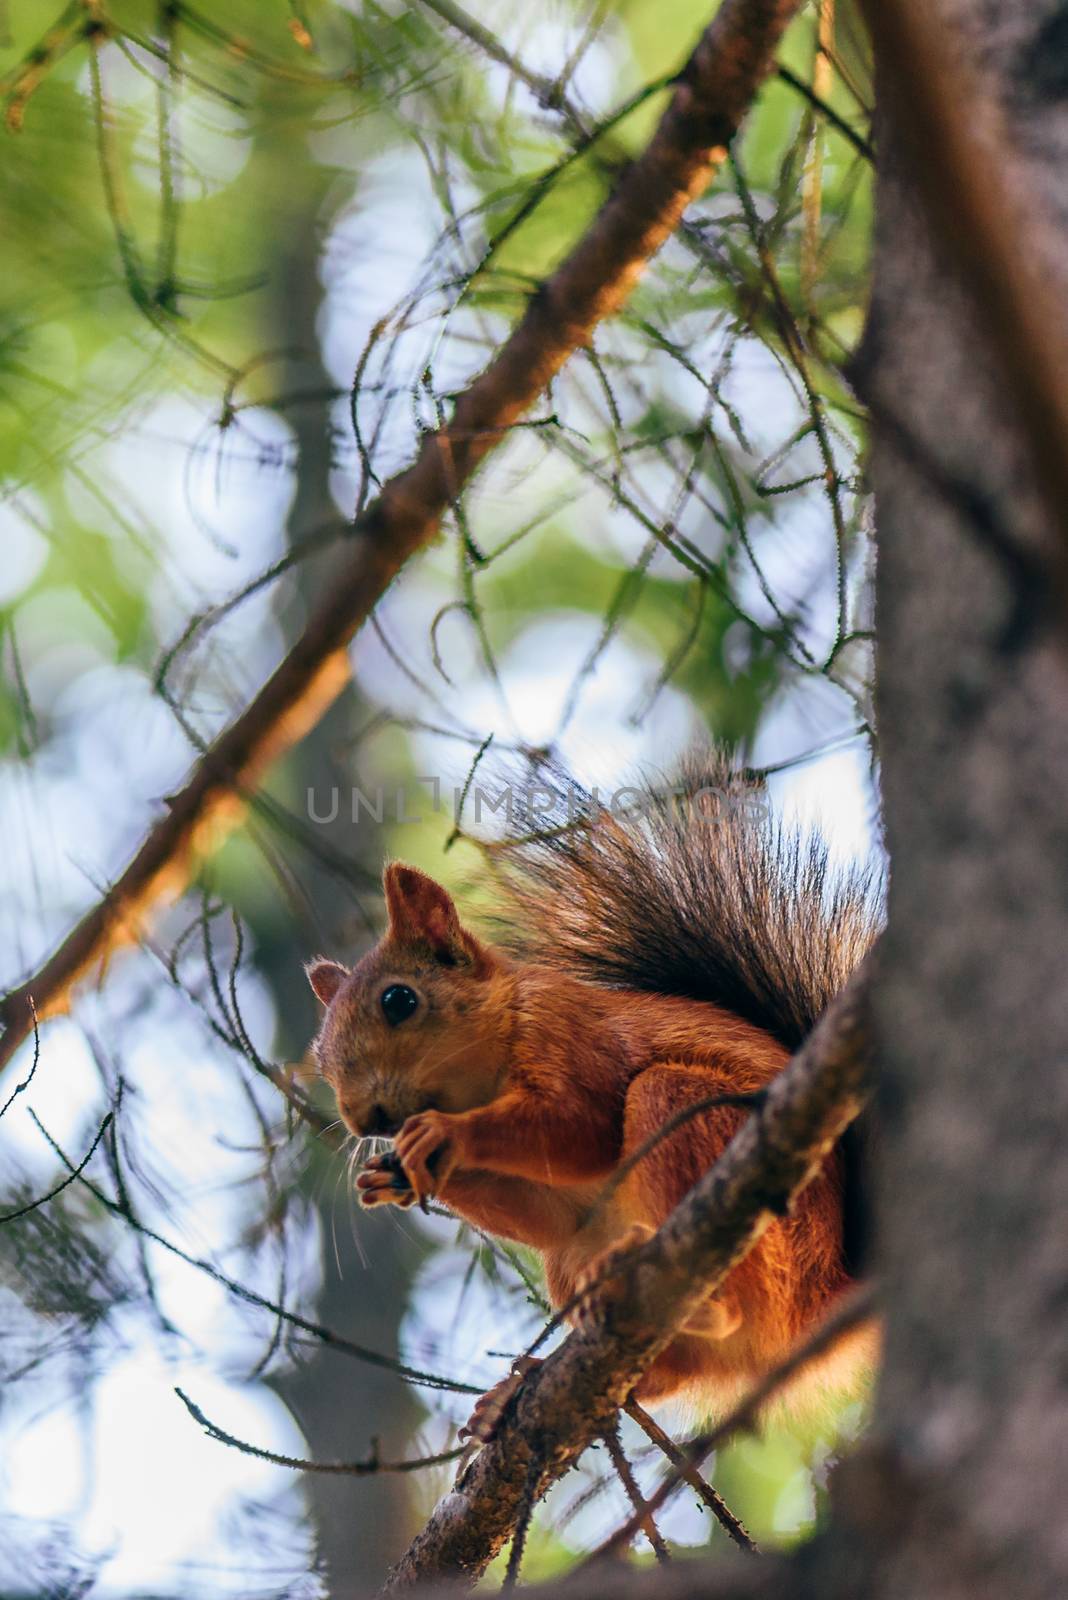 Red squirrel eats nuts and sits on branch in a pine forest.